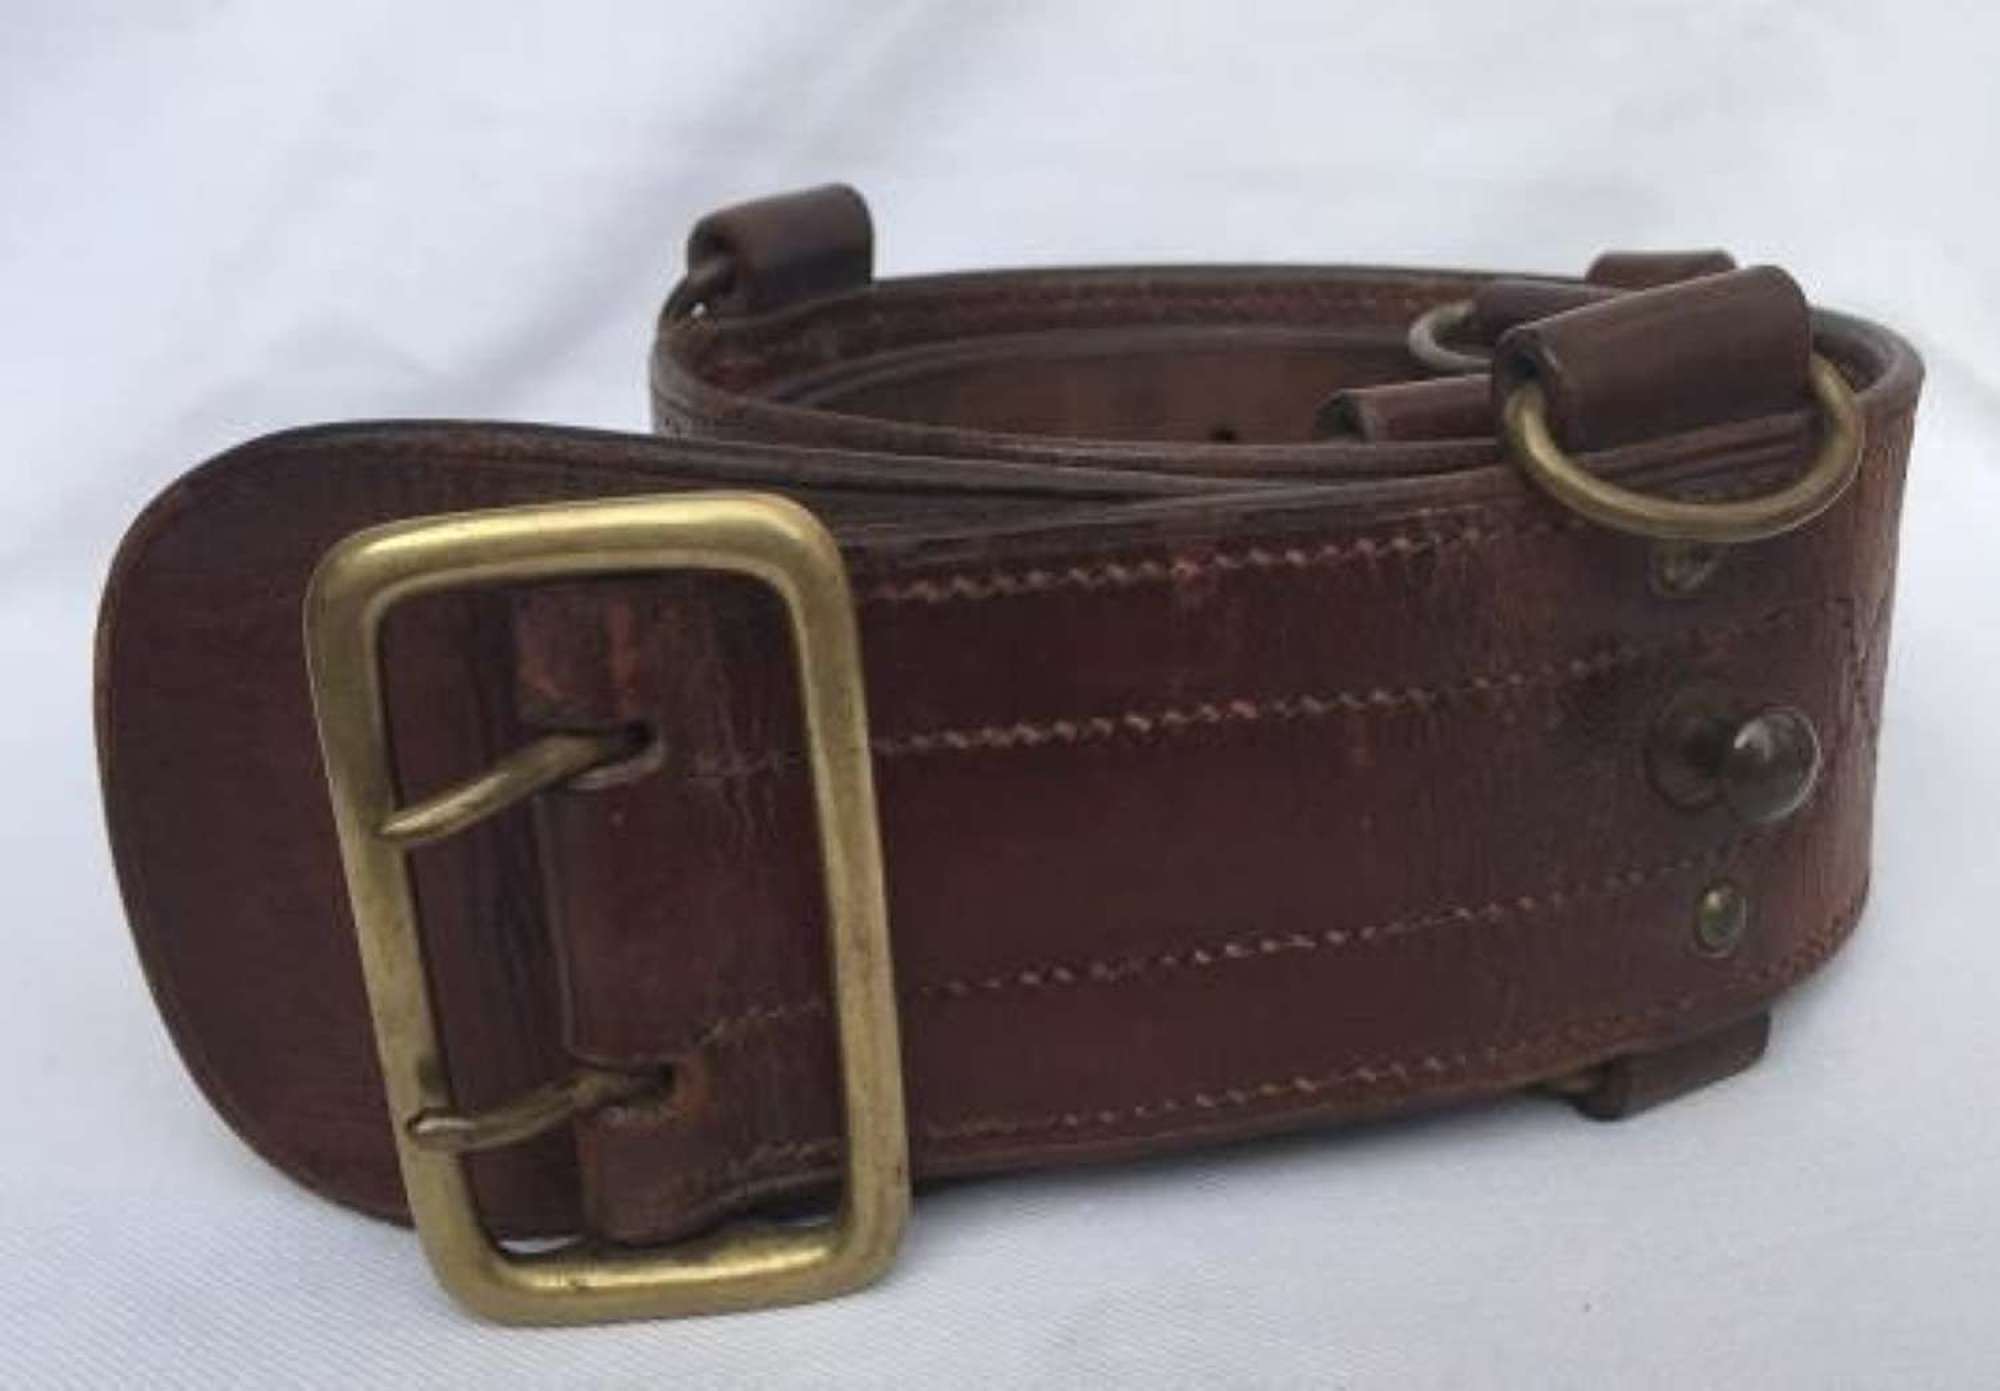 1941 Dated British Army Sam Browne Belt With Double D-Rings